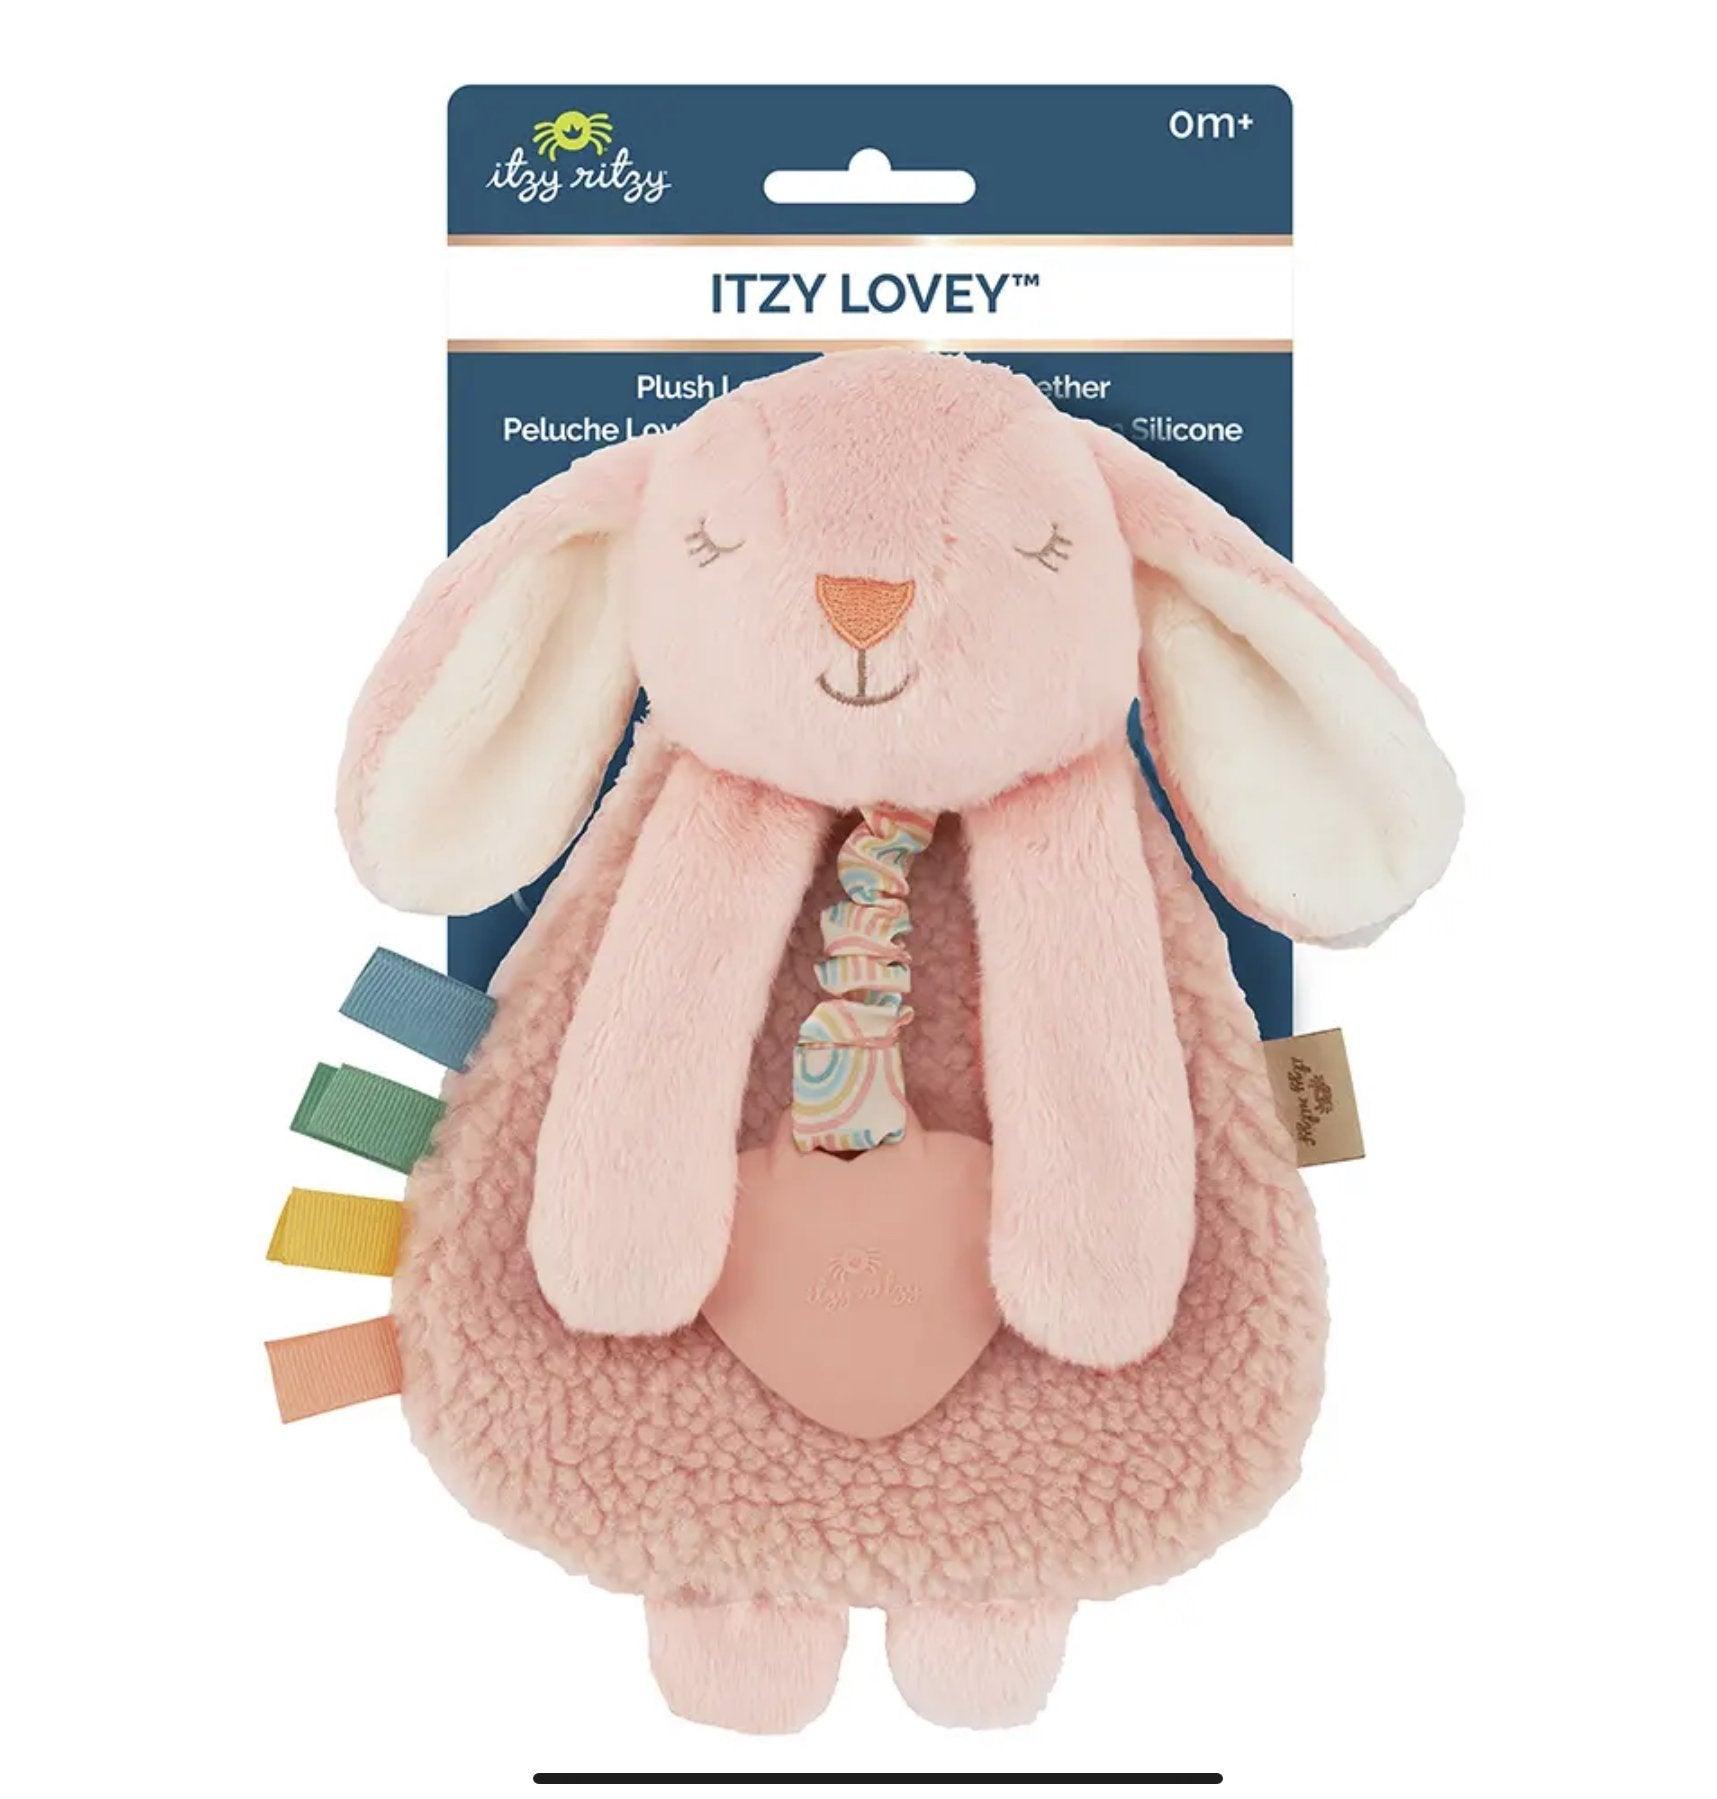 Itzy Lovey Bunny Plush with Silicone Teether Toy Baby in Styles